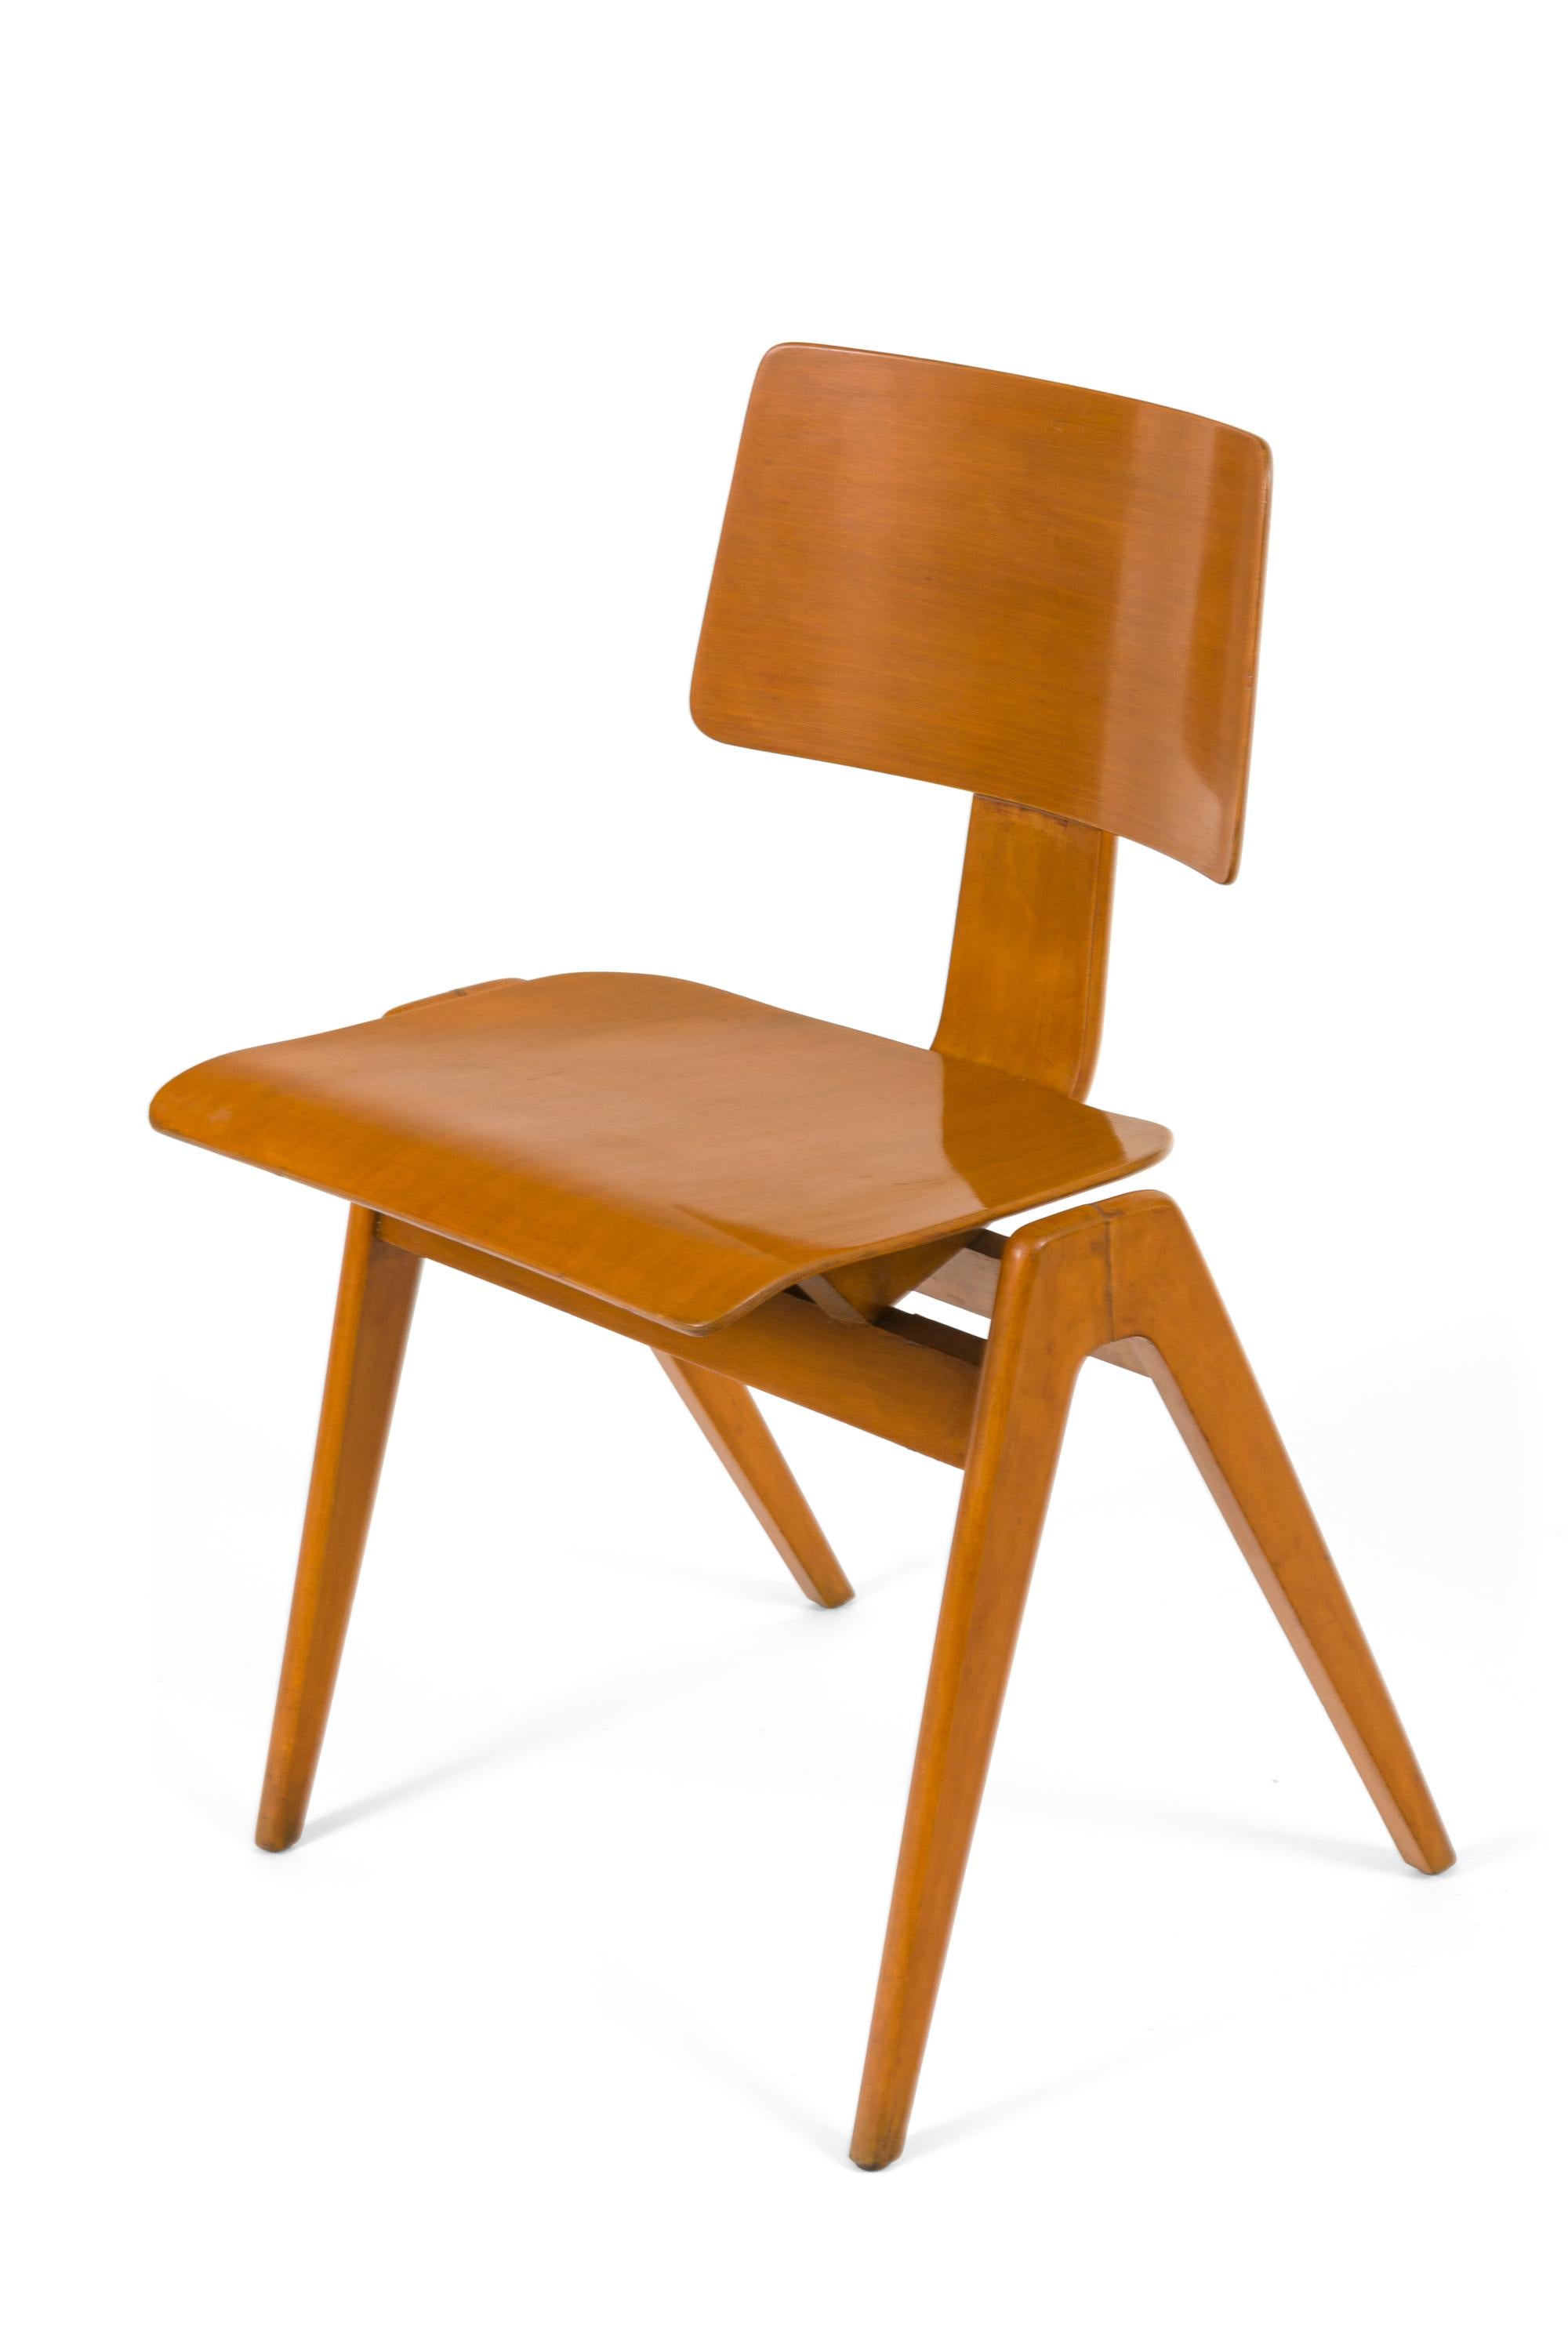 Robin Day was an iconic British industrial designer. The Hille furniture company was in business in London since 1906. In 1949 they hired Robin Day to design low-cost furniture resulting in the Hillestak Chair. He rose to prominence in 1951 when he